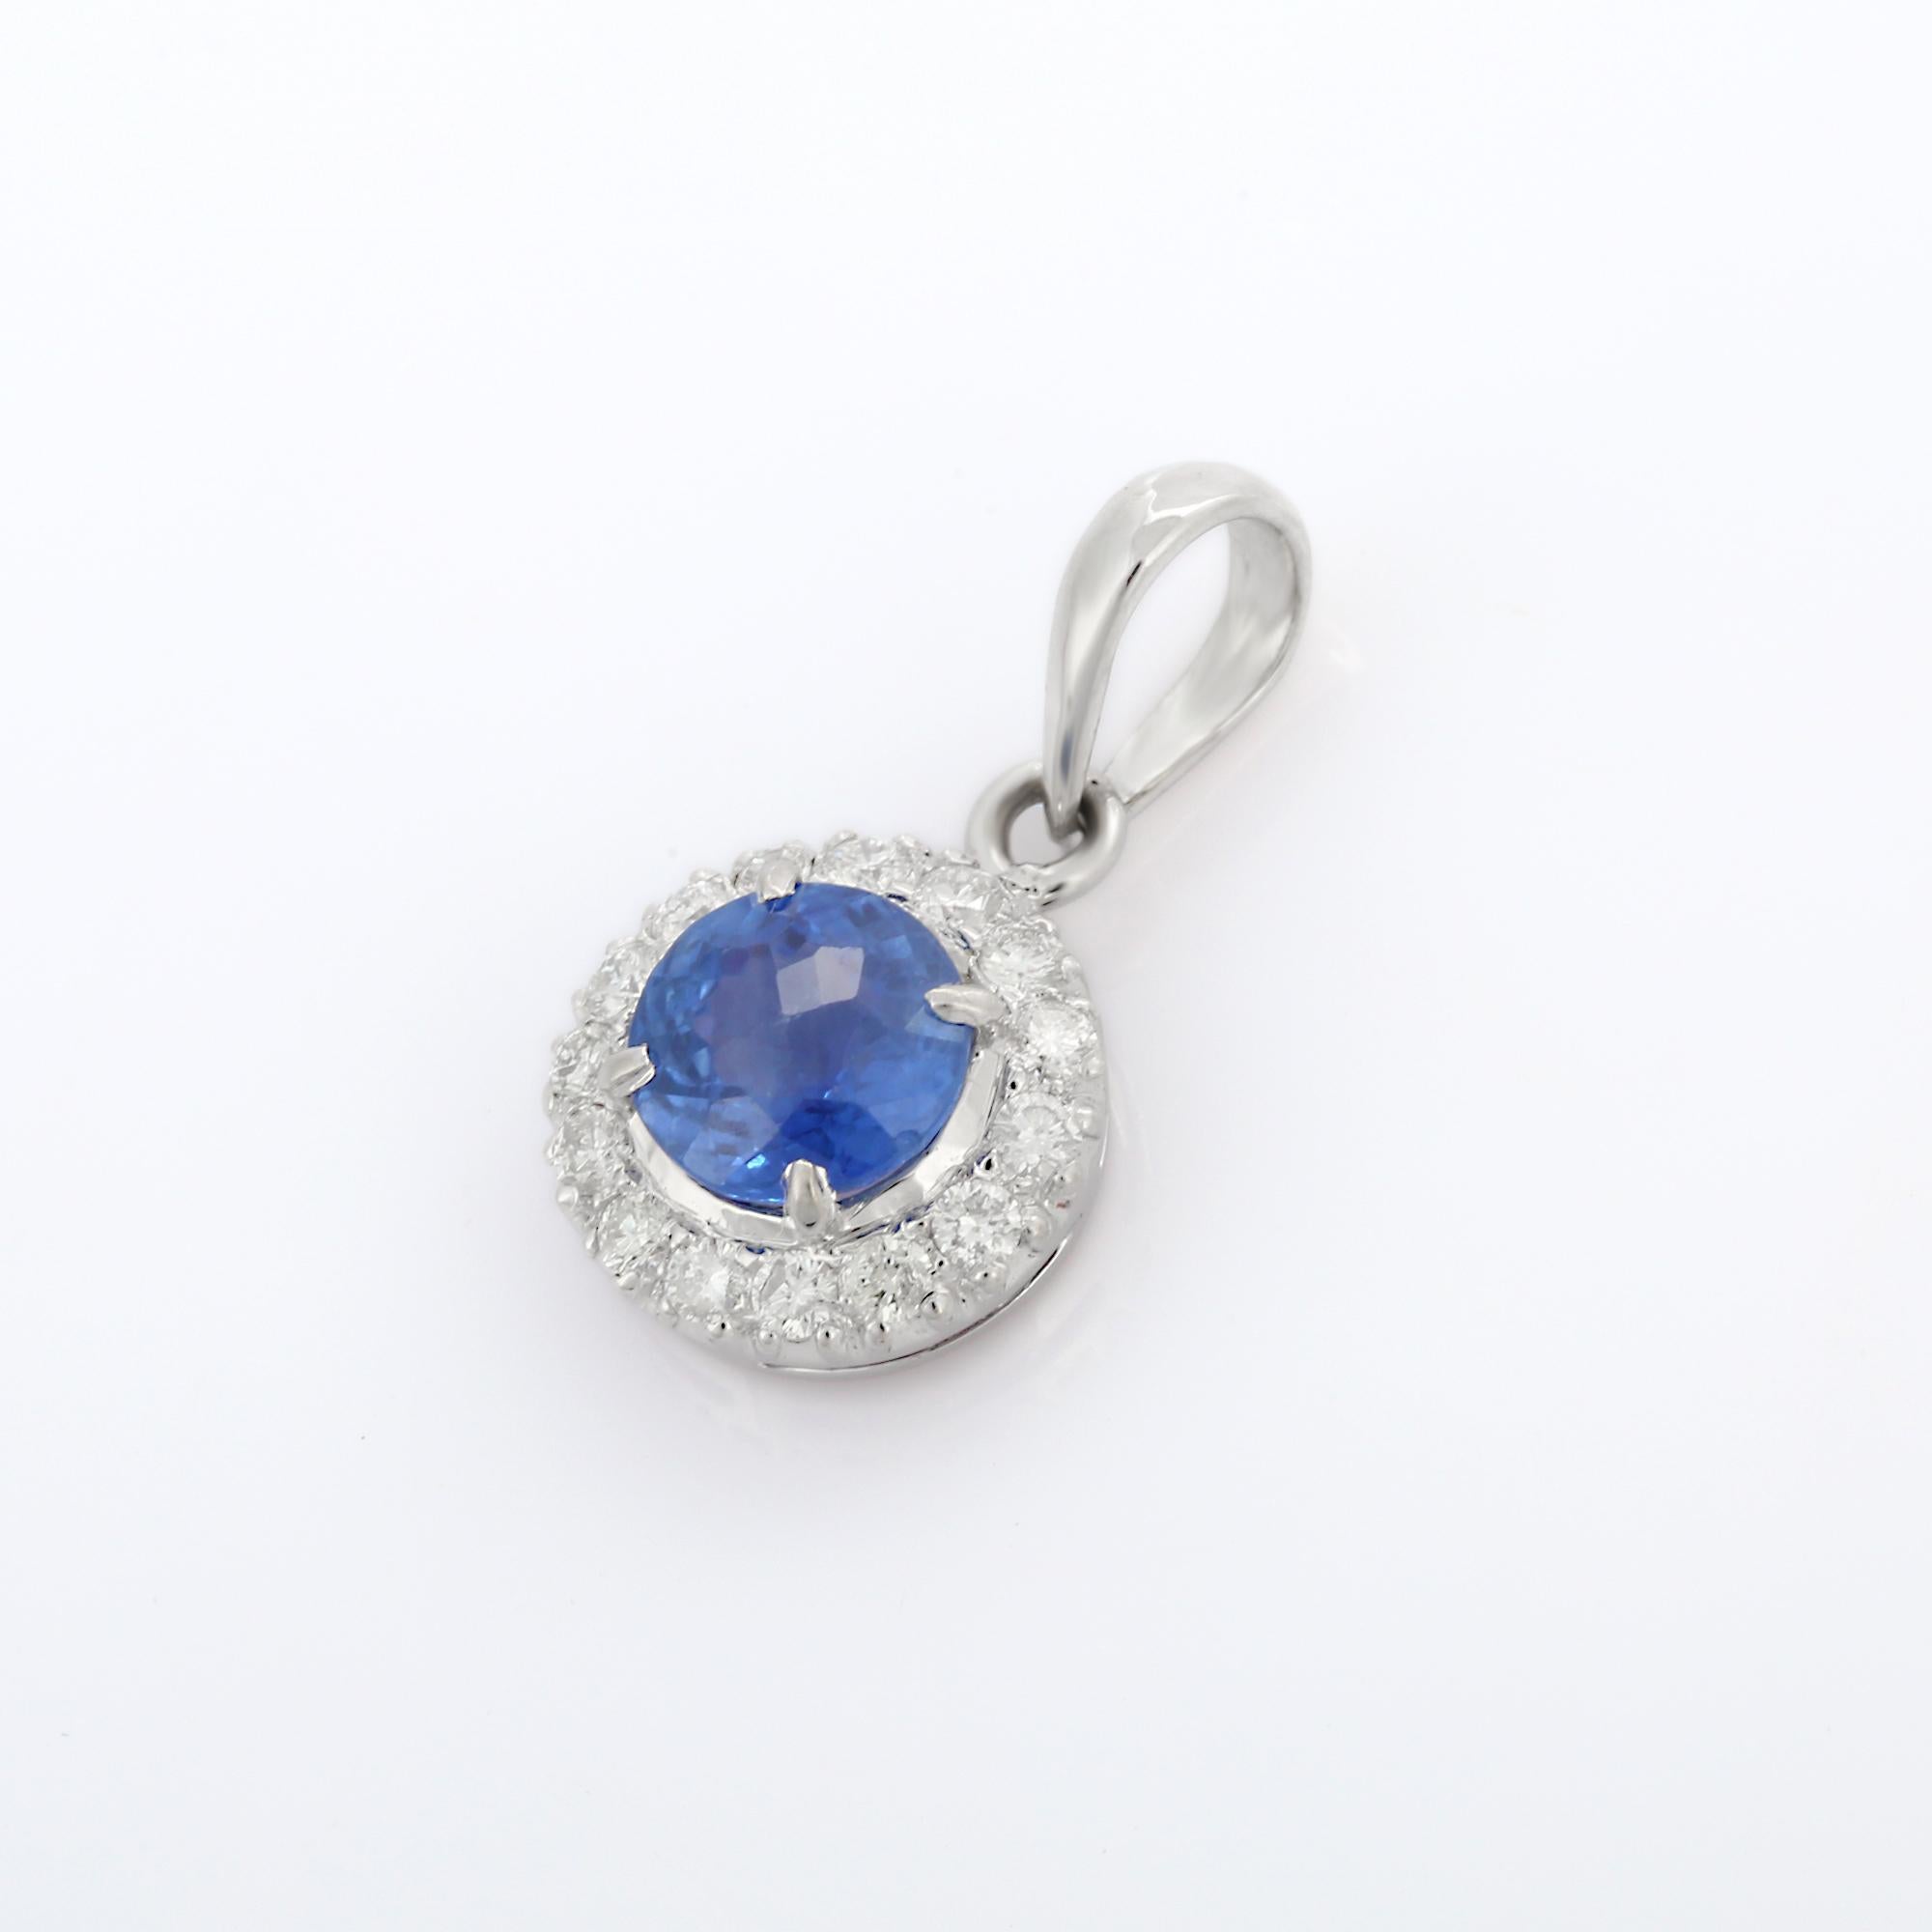 Natural Blue Sapphire pendant in 18K Gold. It has a round cut sapphire studded with halo of diamonds that completes your look with a decent touch. Pendants are used to wear or gifted to represent love and promises. It's an attractive jewelry piece